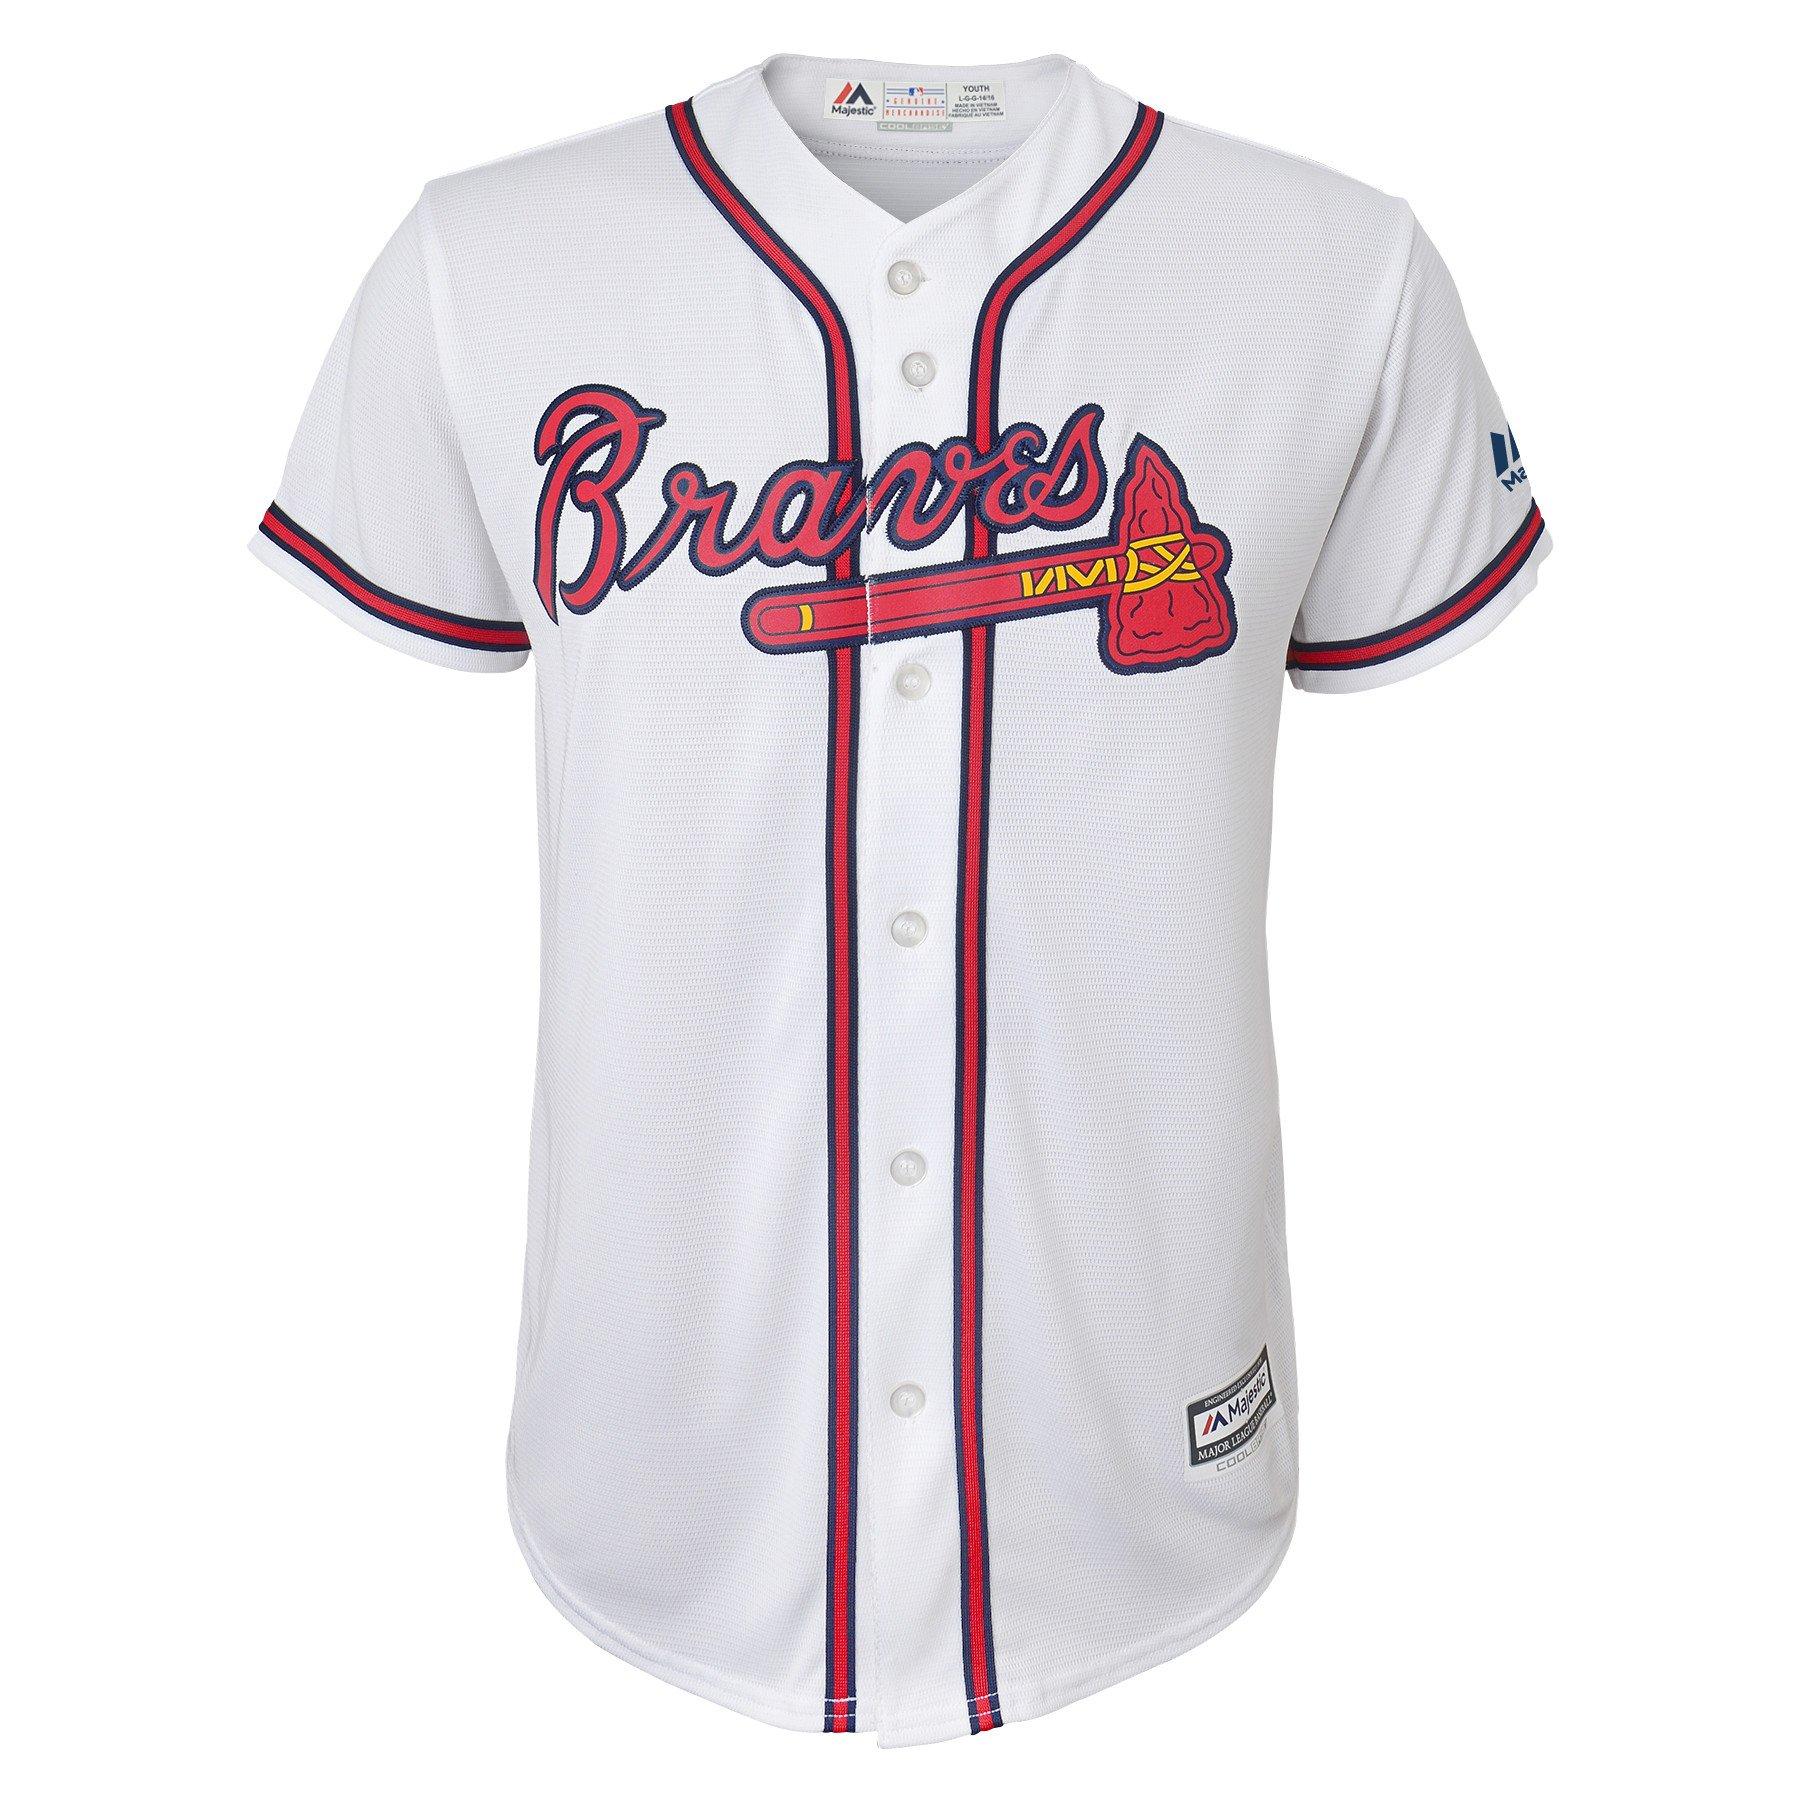 acuna jersey youth